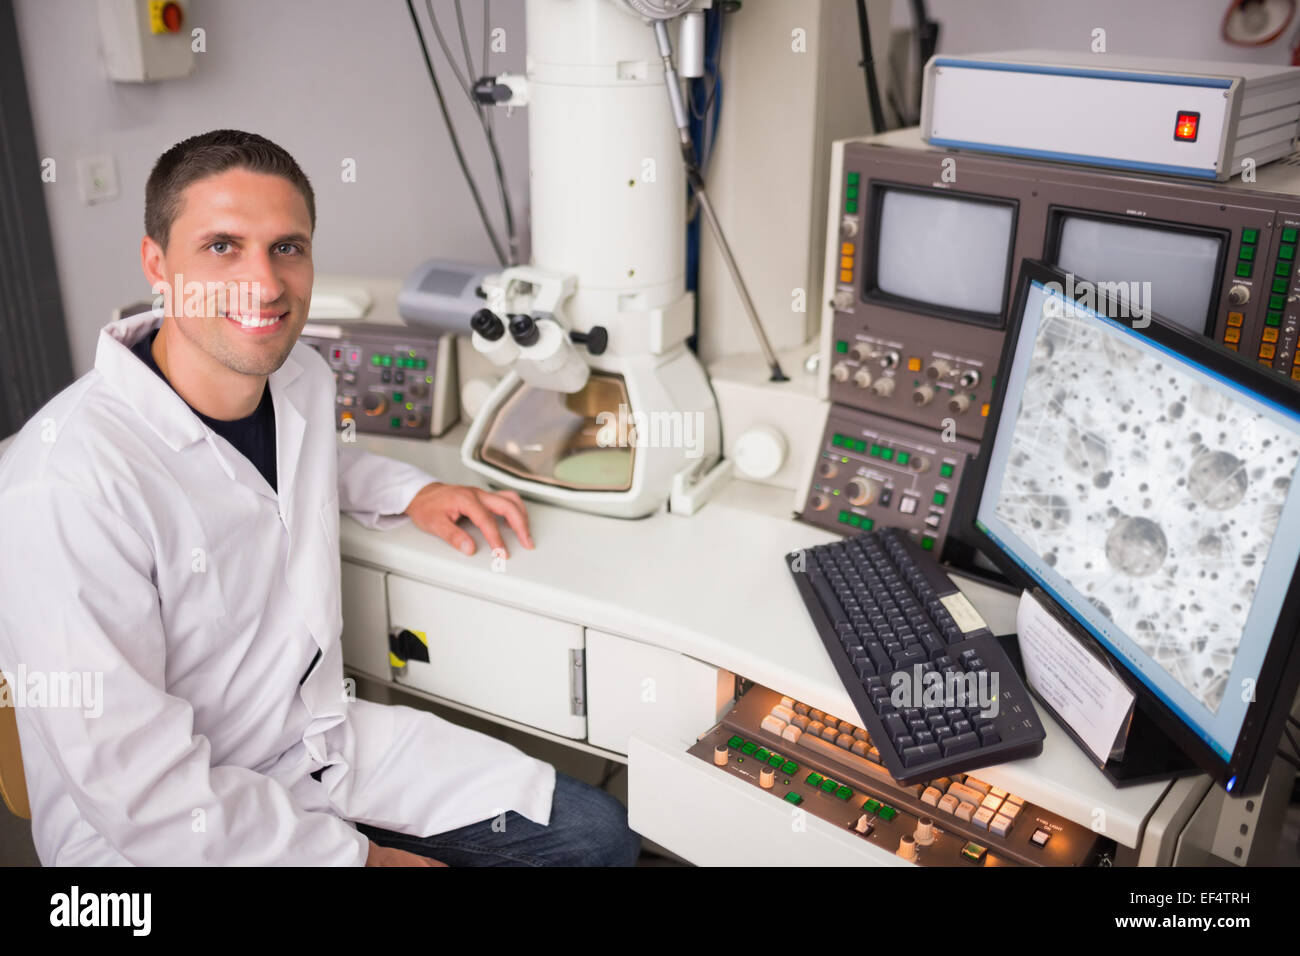 Biochemistry student using large microscope and computer Stock Photo